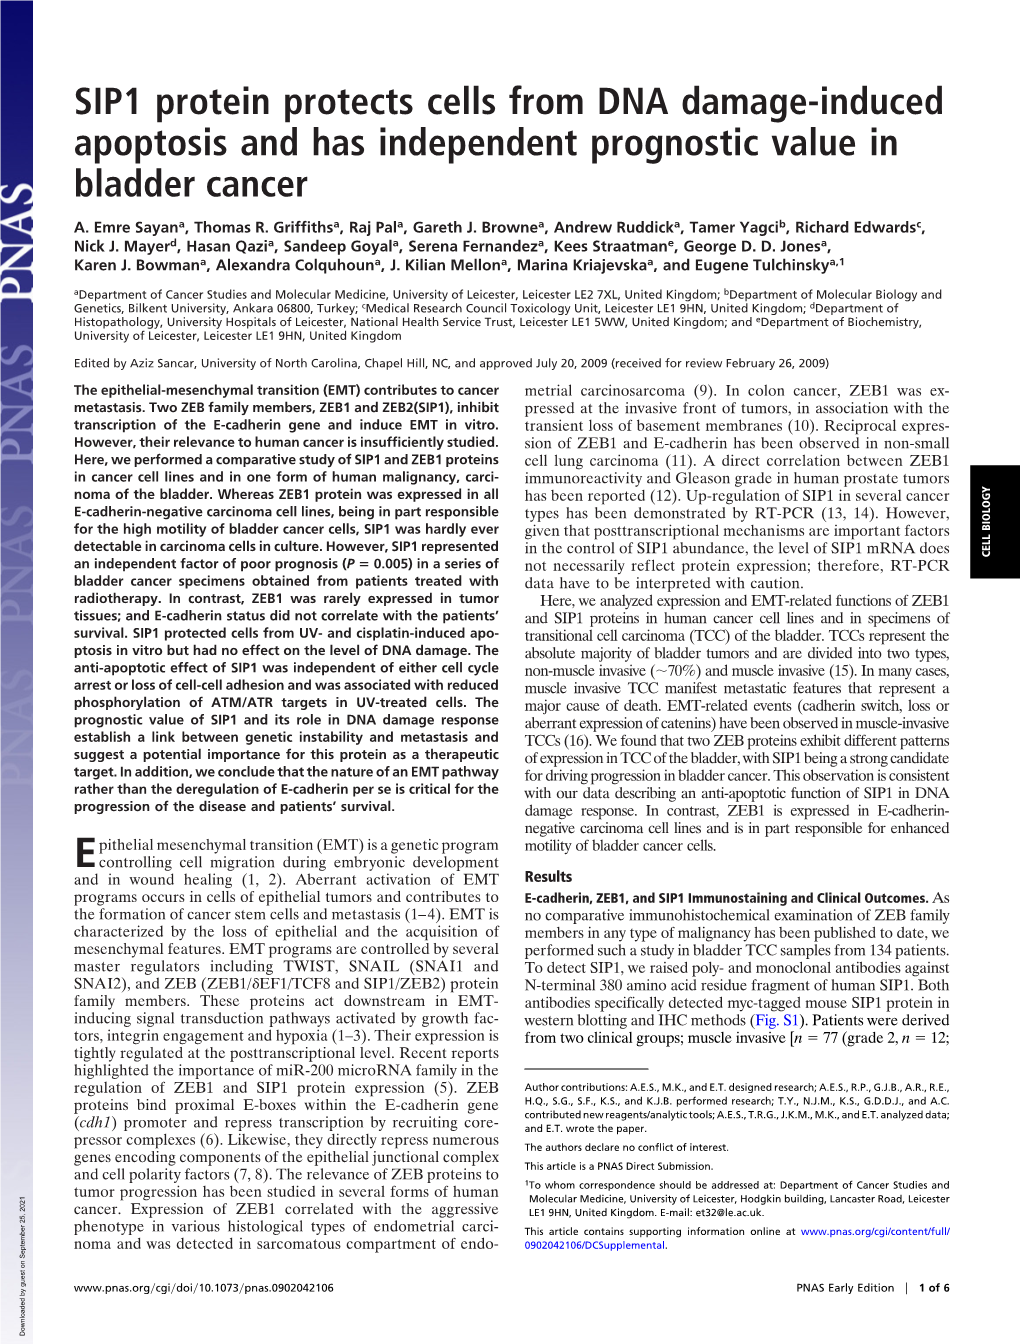 SIP1 Protein Protects Cells from DNA Damage-Induced Apoptosis and Has Independent Prognostic Value in Bladder Cancer